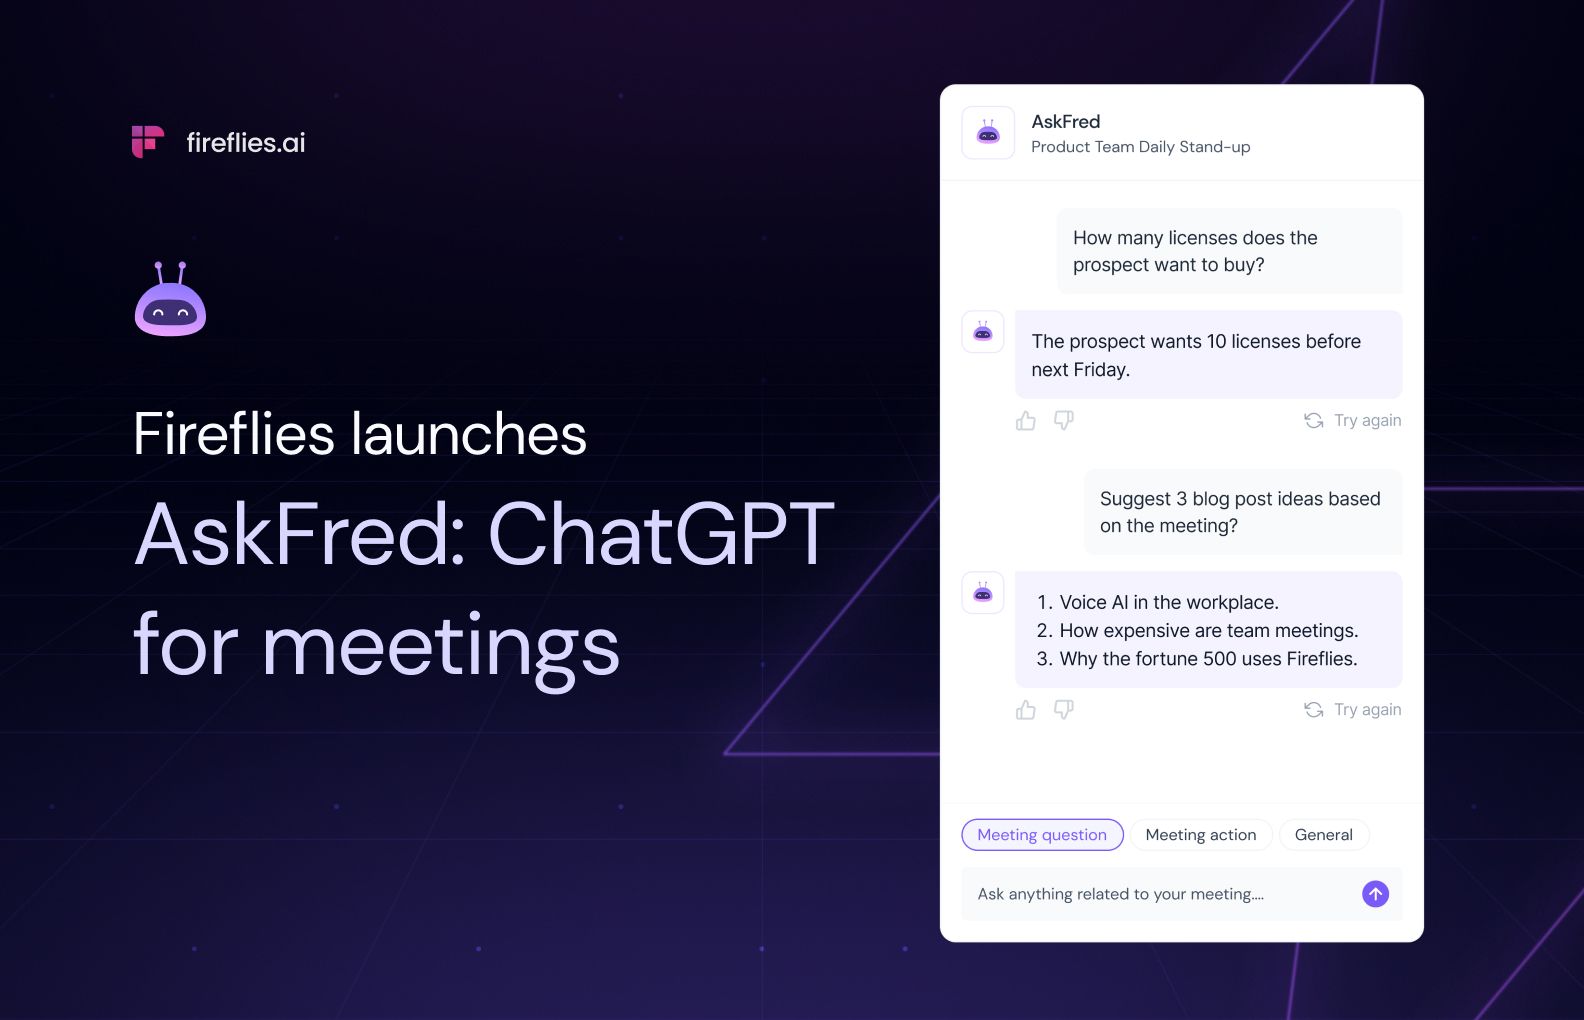 Fireflies Launches AskFred: ChatGPT For Meetings